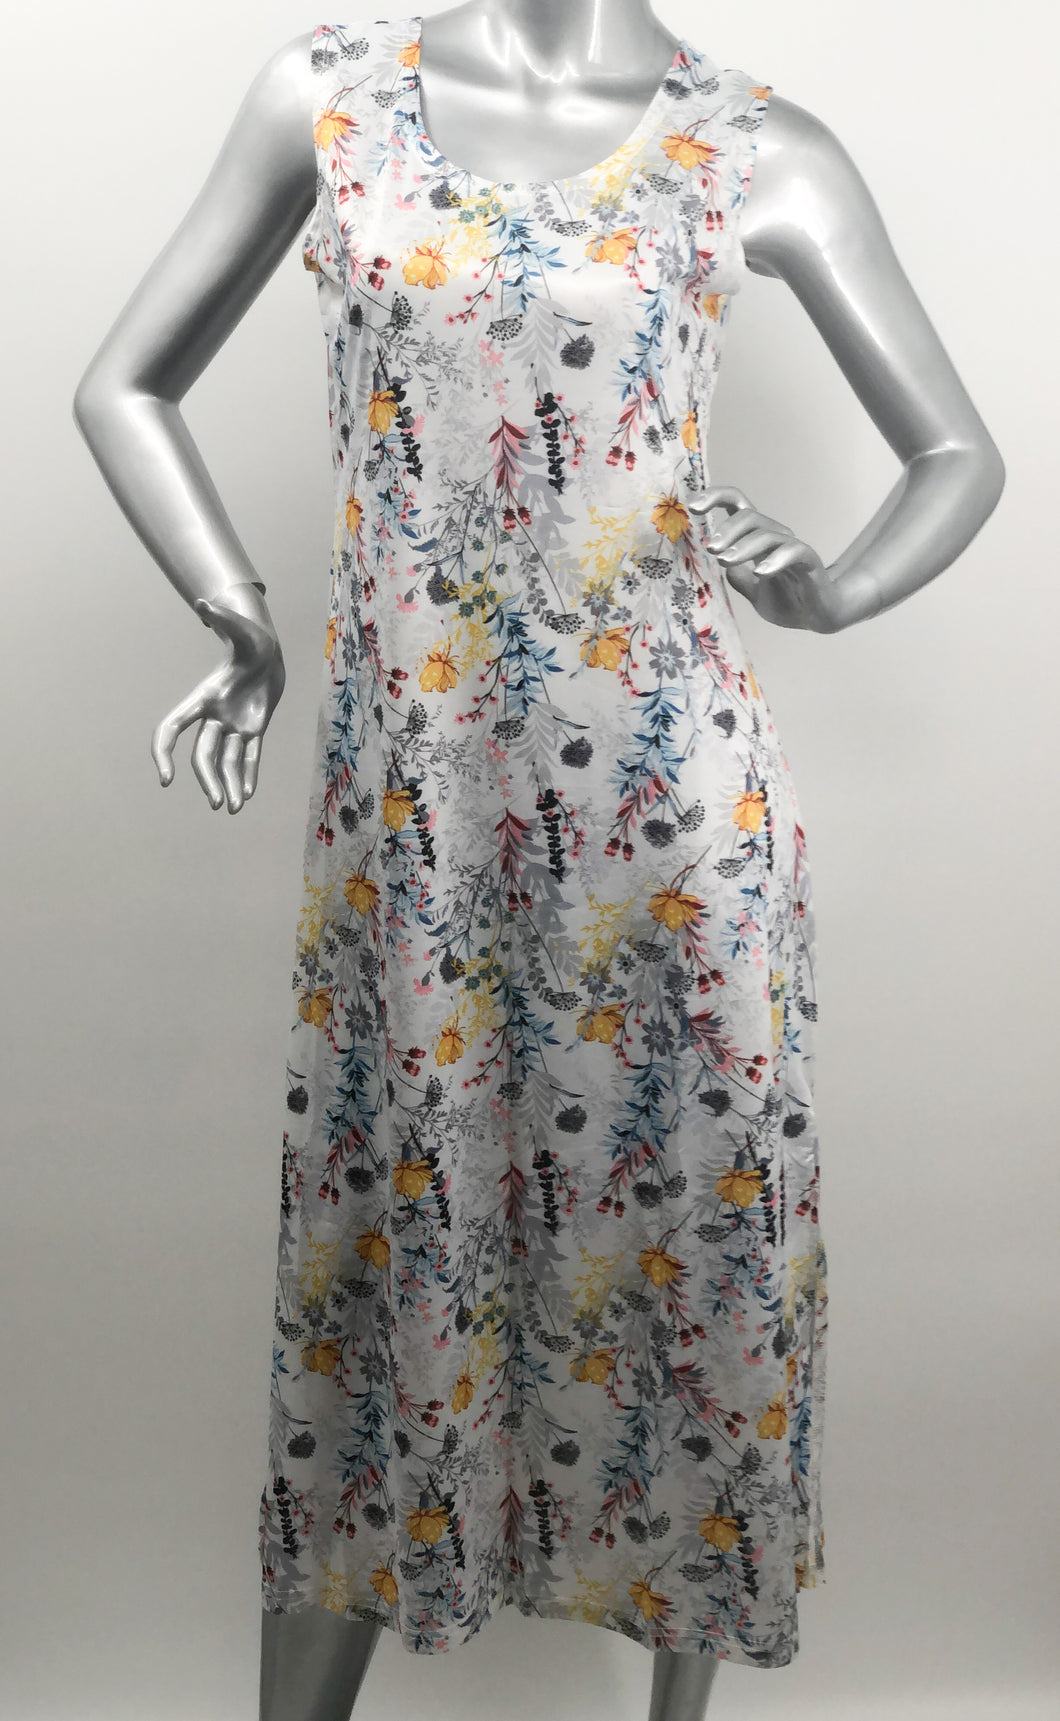 A gorgeous summer dress, our Wendi White Garden Sleeveless Midi Dress by Papillon is sure to be your next favorite.  A beautiful satin fabrication provides a cool, comfortable feel during those hot summer days.